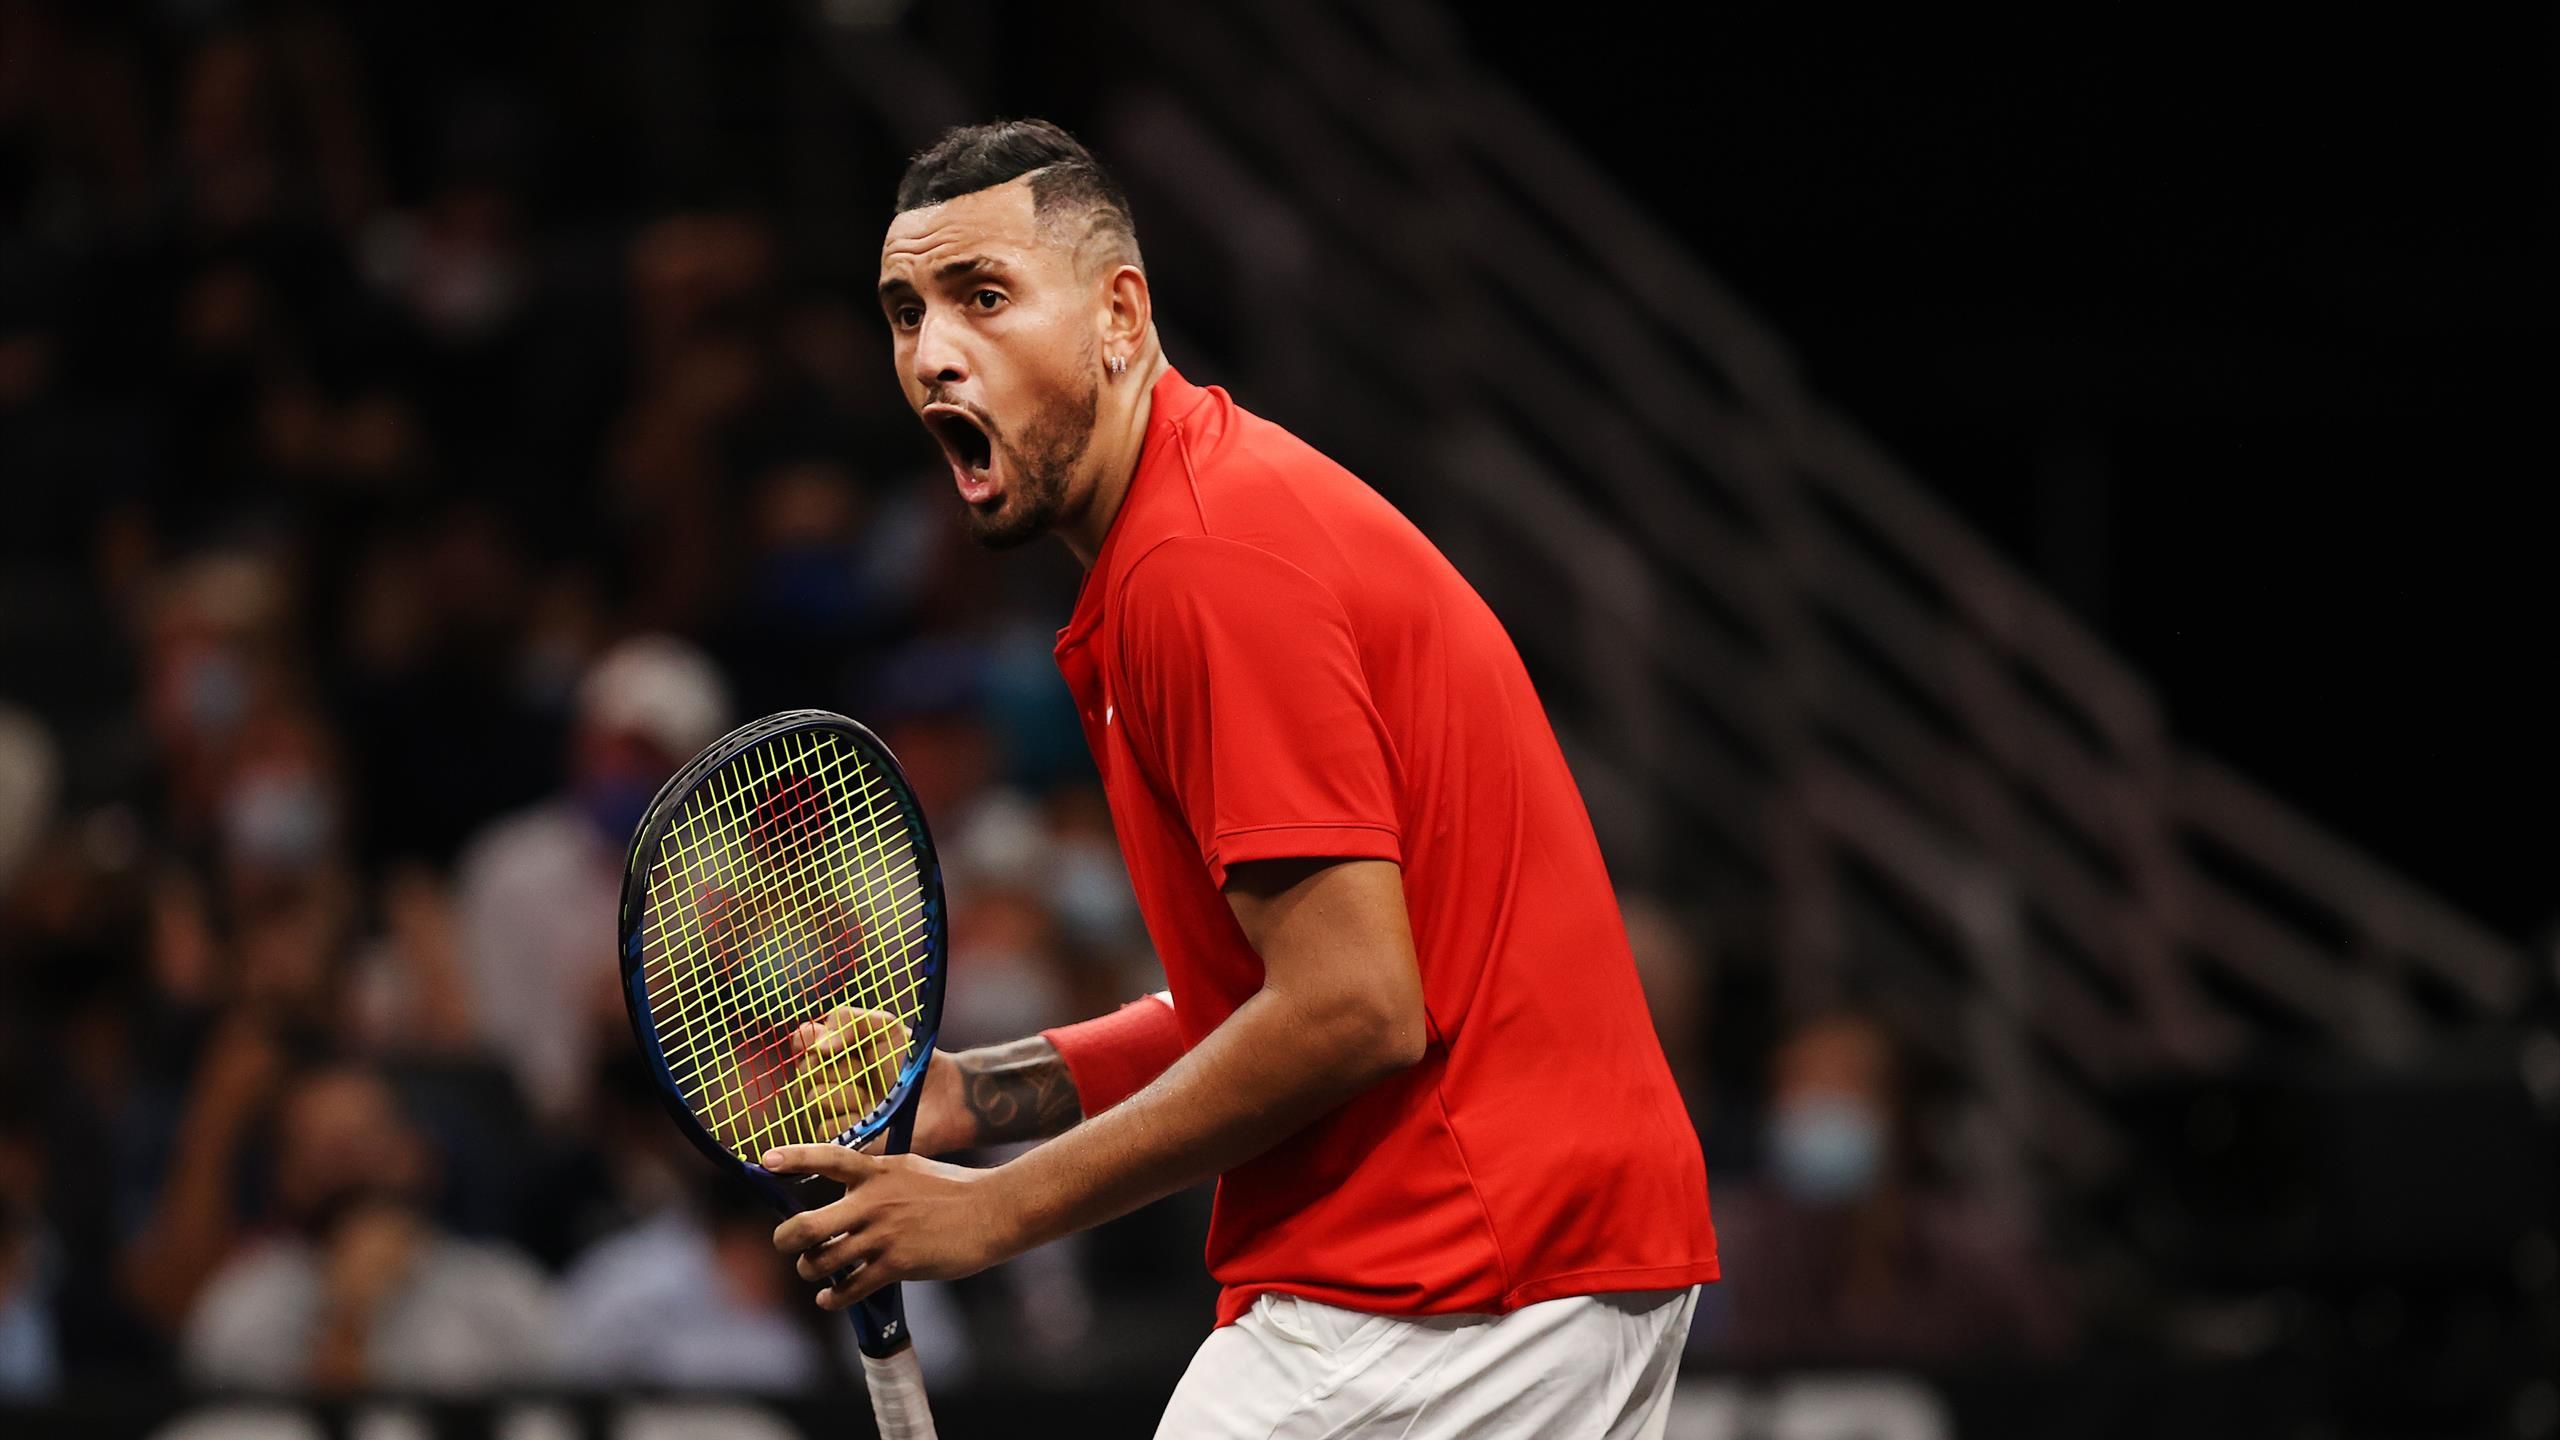 Nick Kyrgios confirms 2023 Laver Cup appearance for Team World in Vancouver, Holger Rune called up to Team Europe